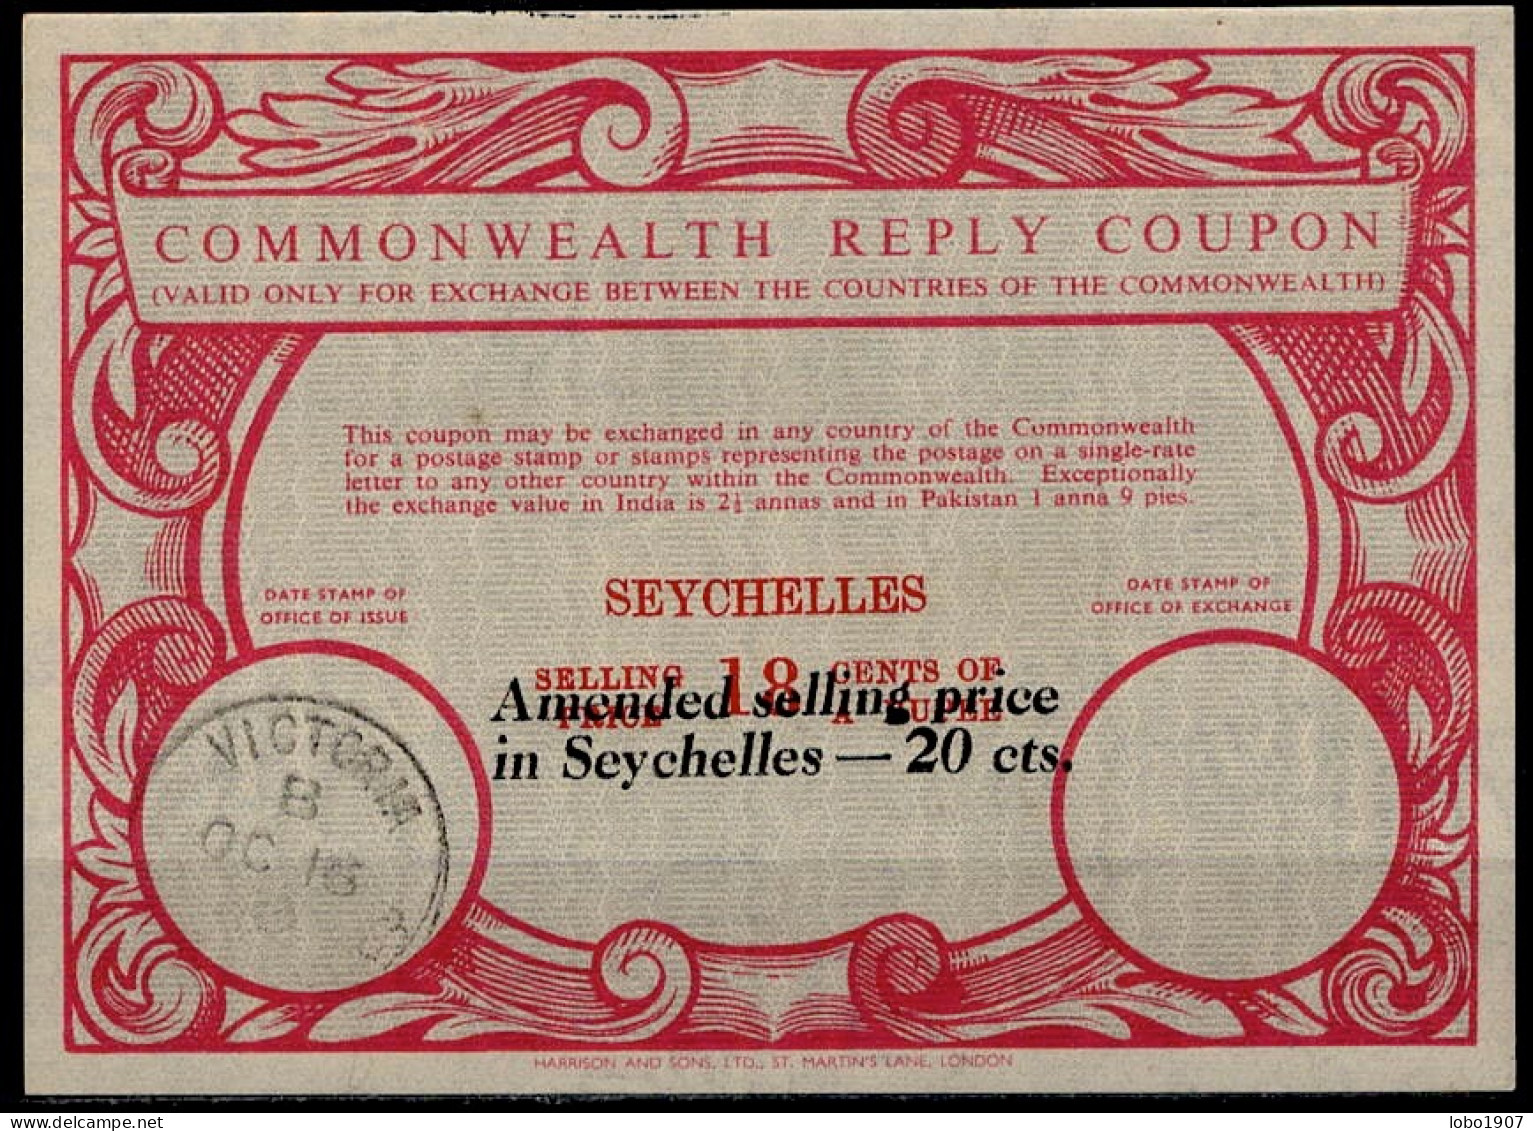 SEYCHELLES  Co9 AMENDED SELLING PRICE 20 CTS. / 18 CENTS Commonwealth Reply Coupon Reponse Antwortschein IRC IAS O VICTO - Seychelles (1976-...)